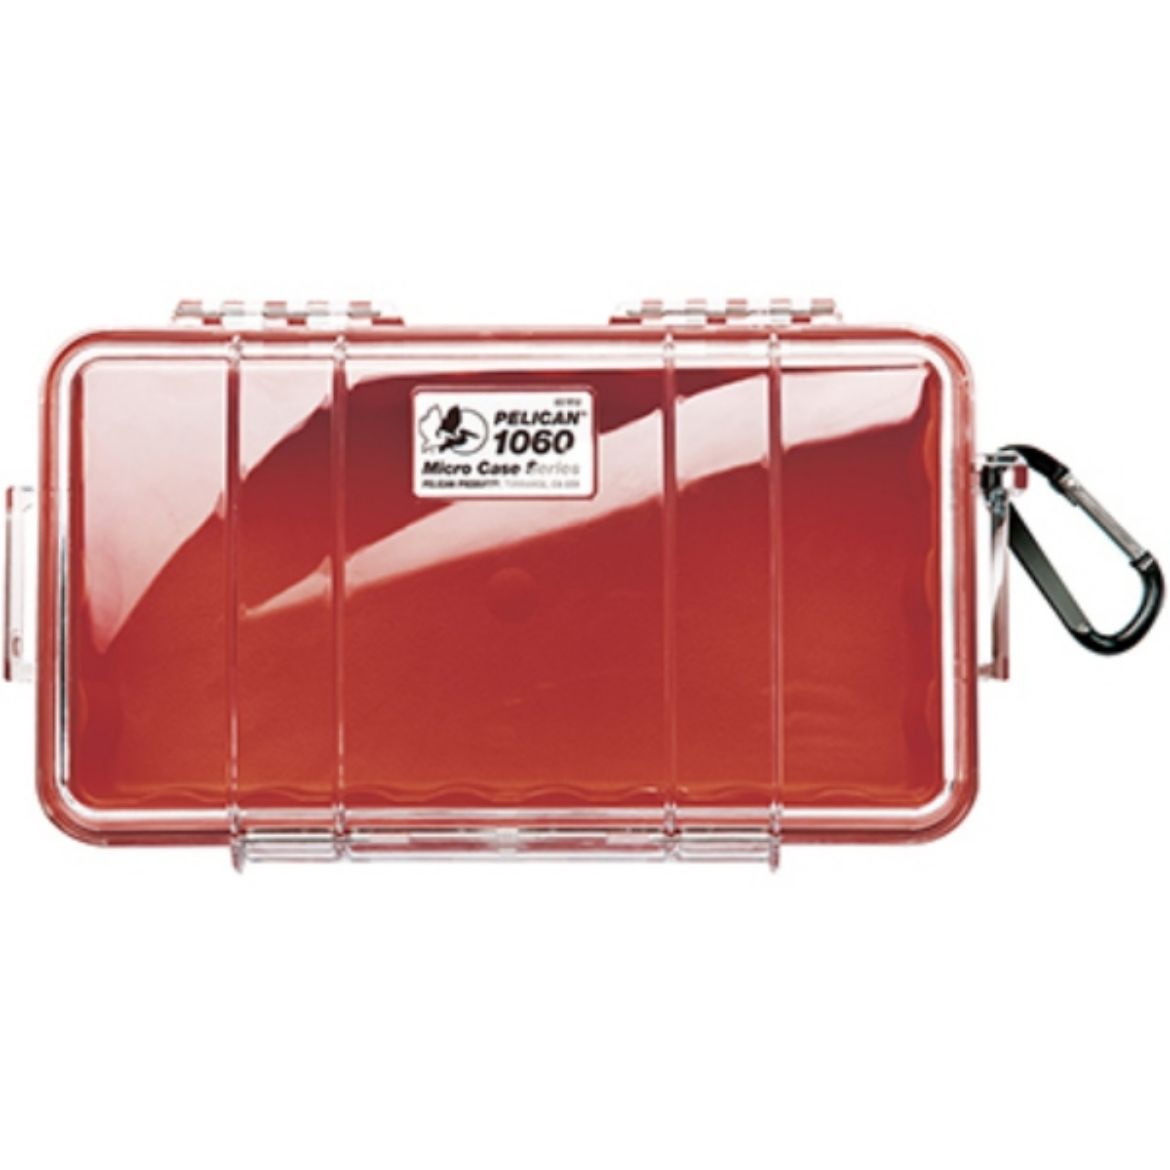 Picture of # 1060 MICRO PELICAN CASE - CLEAR WITH RED